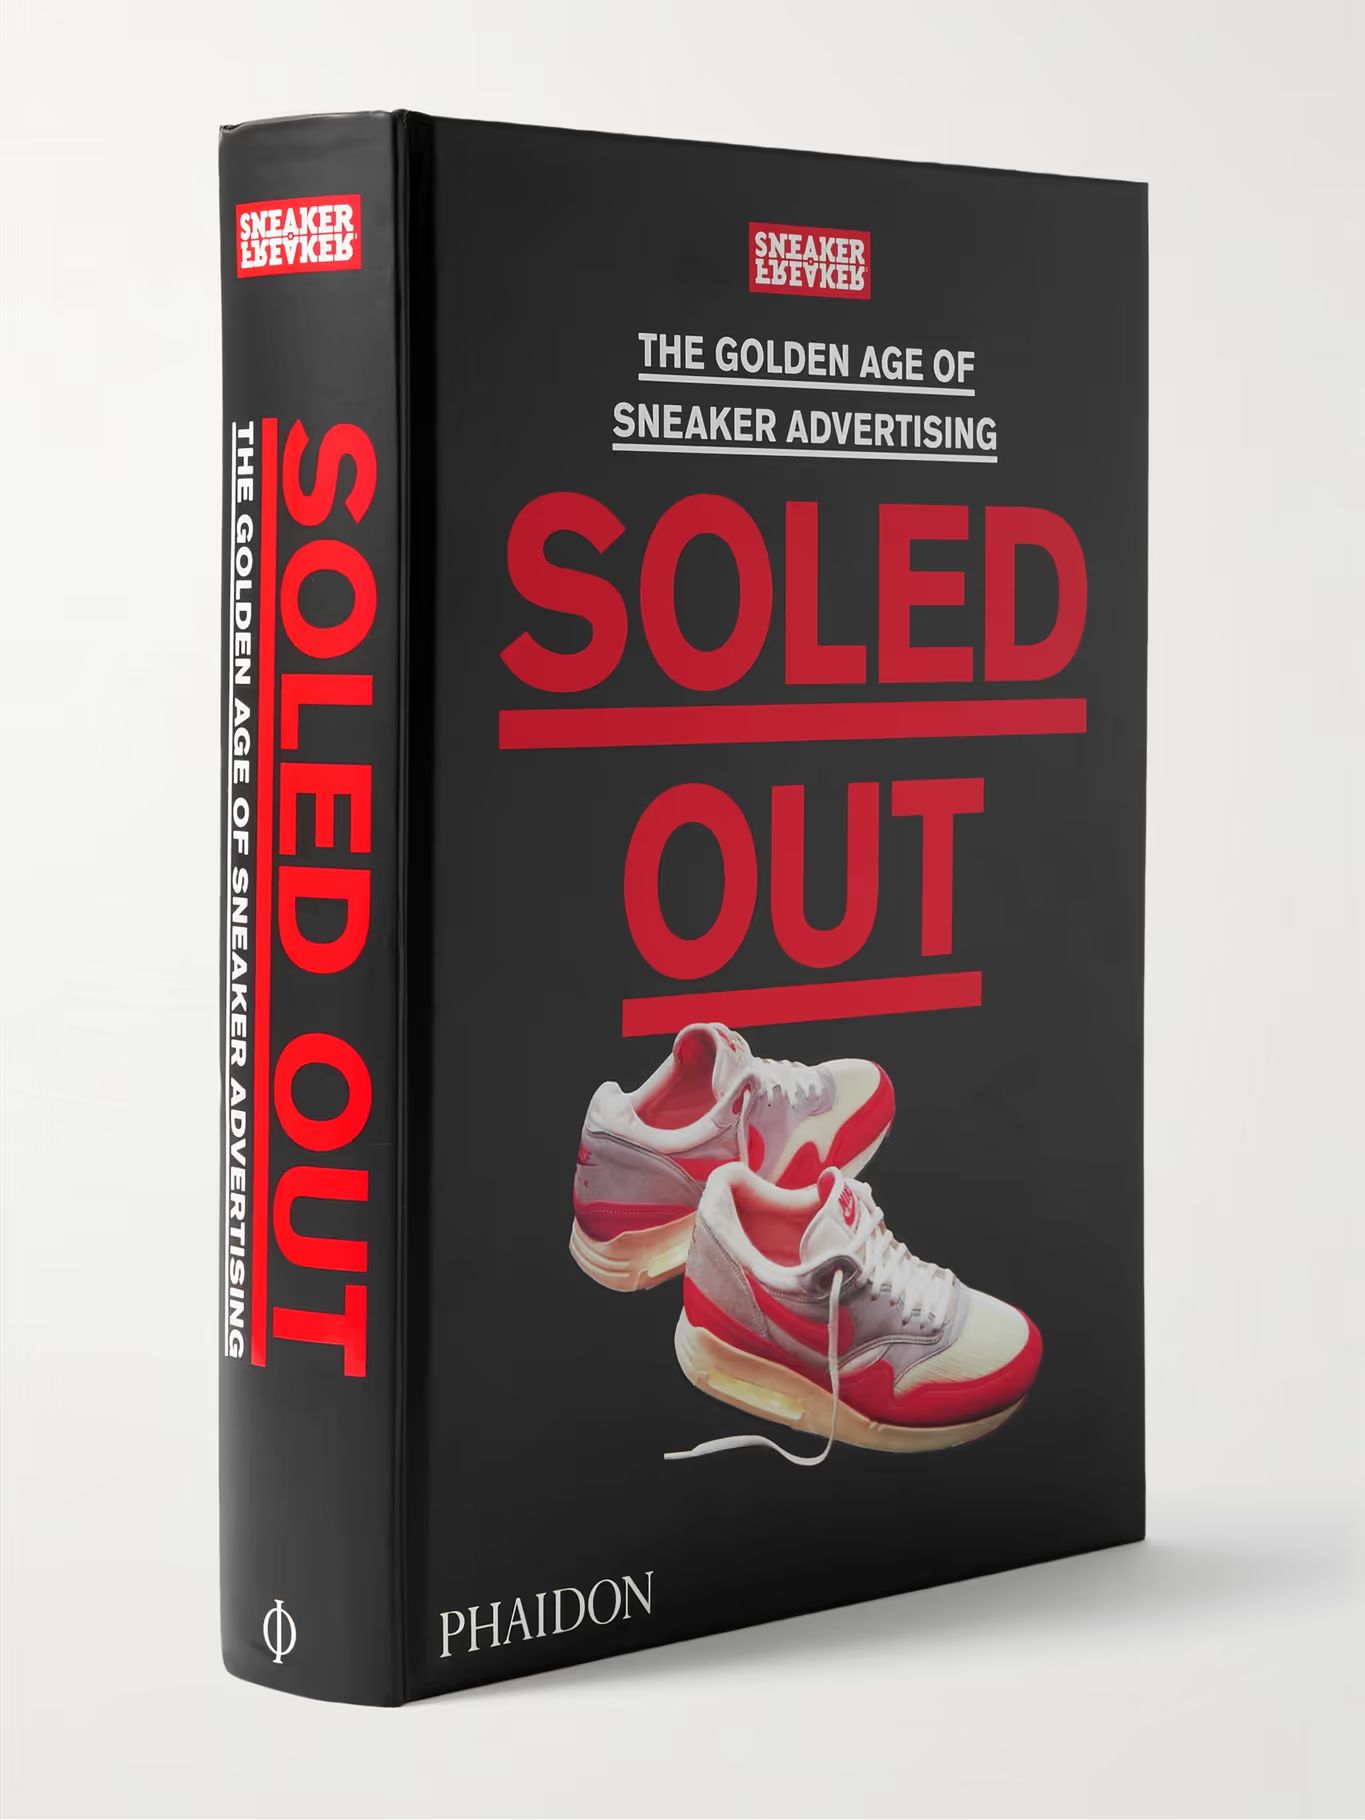 Soled Out: The Golden Age of Sneaker Advertising Hardcover Book | Mr Porter (US & CA)